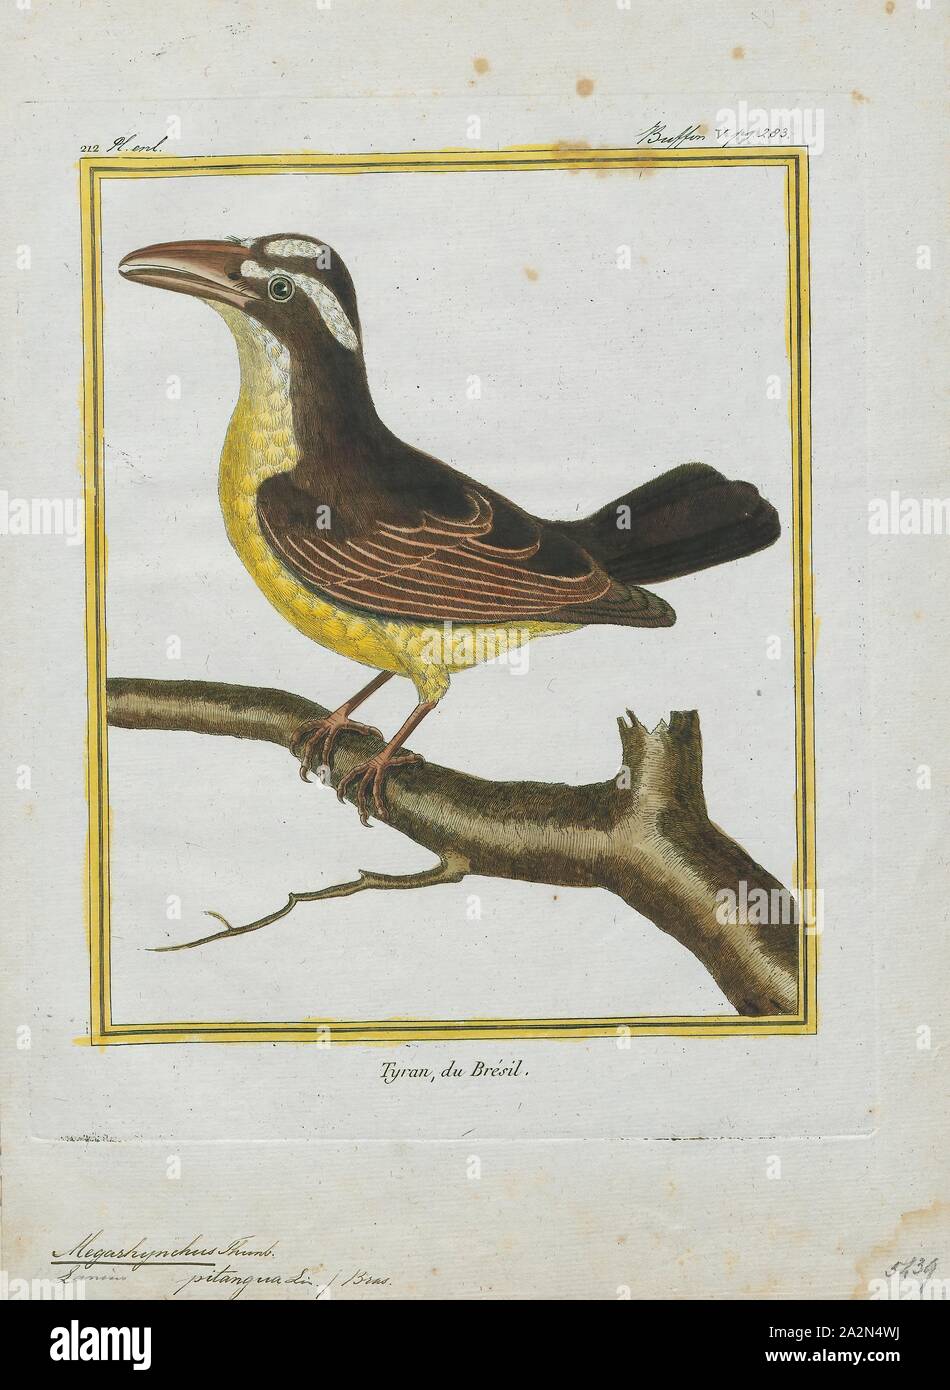 Megarhynchus pitangua, Print, The boat-billed flycatcher (Megarynchus pitangua) is a passerine bird. It is a large tyrant flycatcher, the only member of the monotypic genus Megarynchus., 1700-1880 Stock Photo